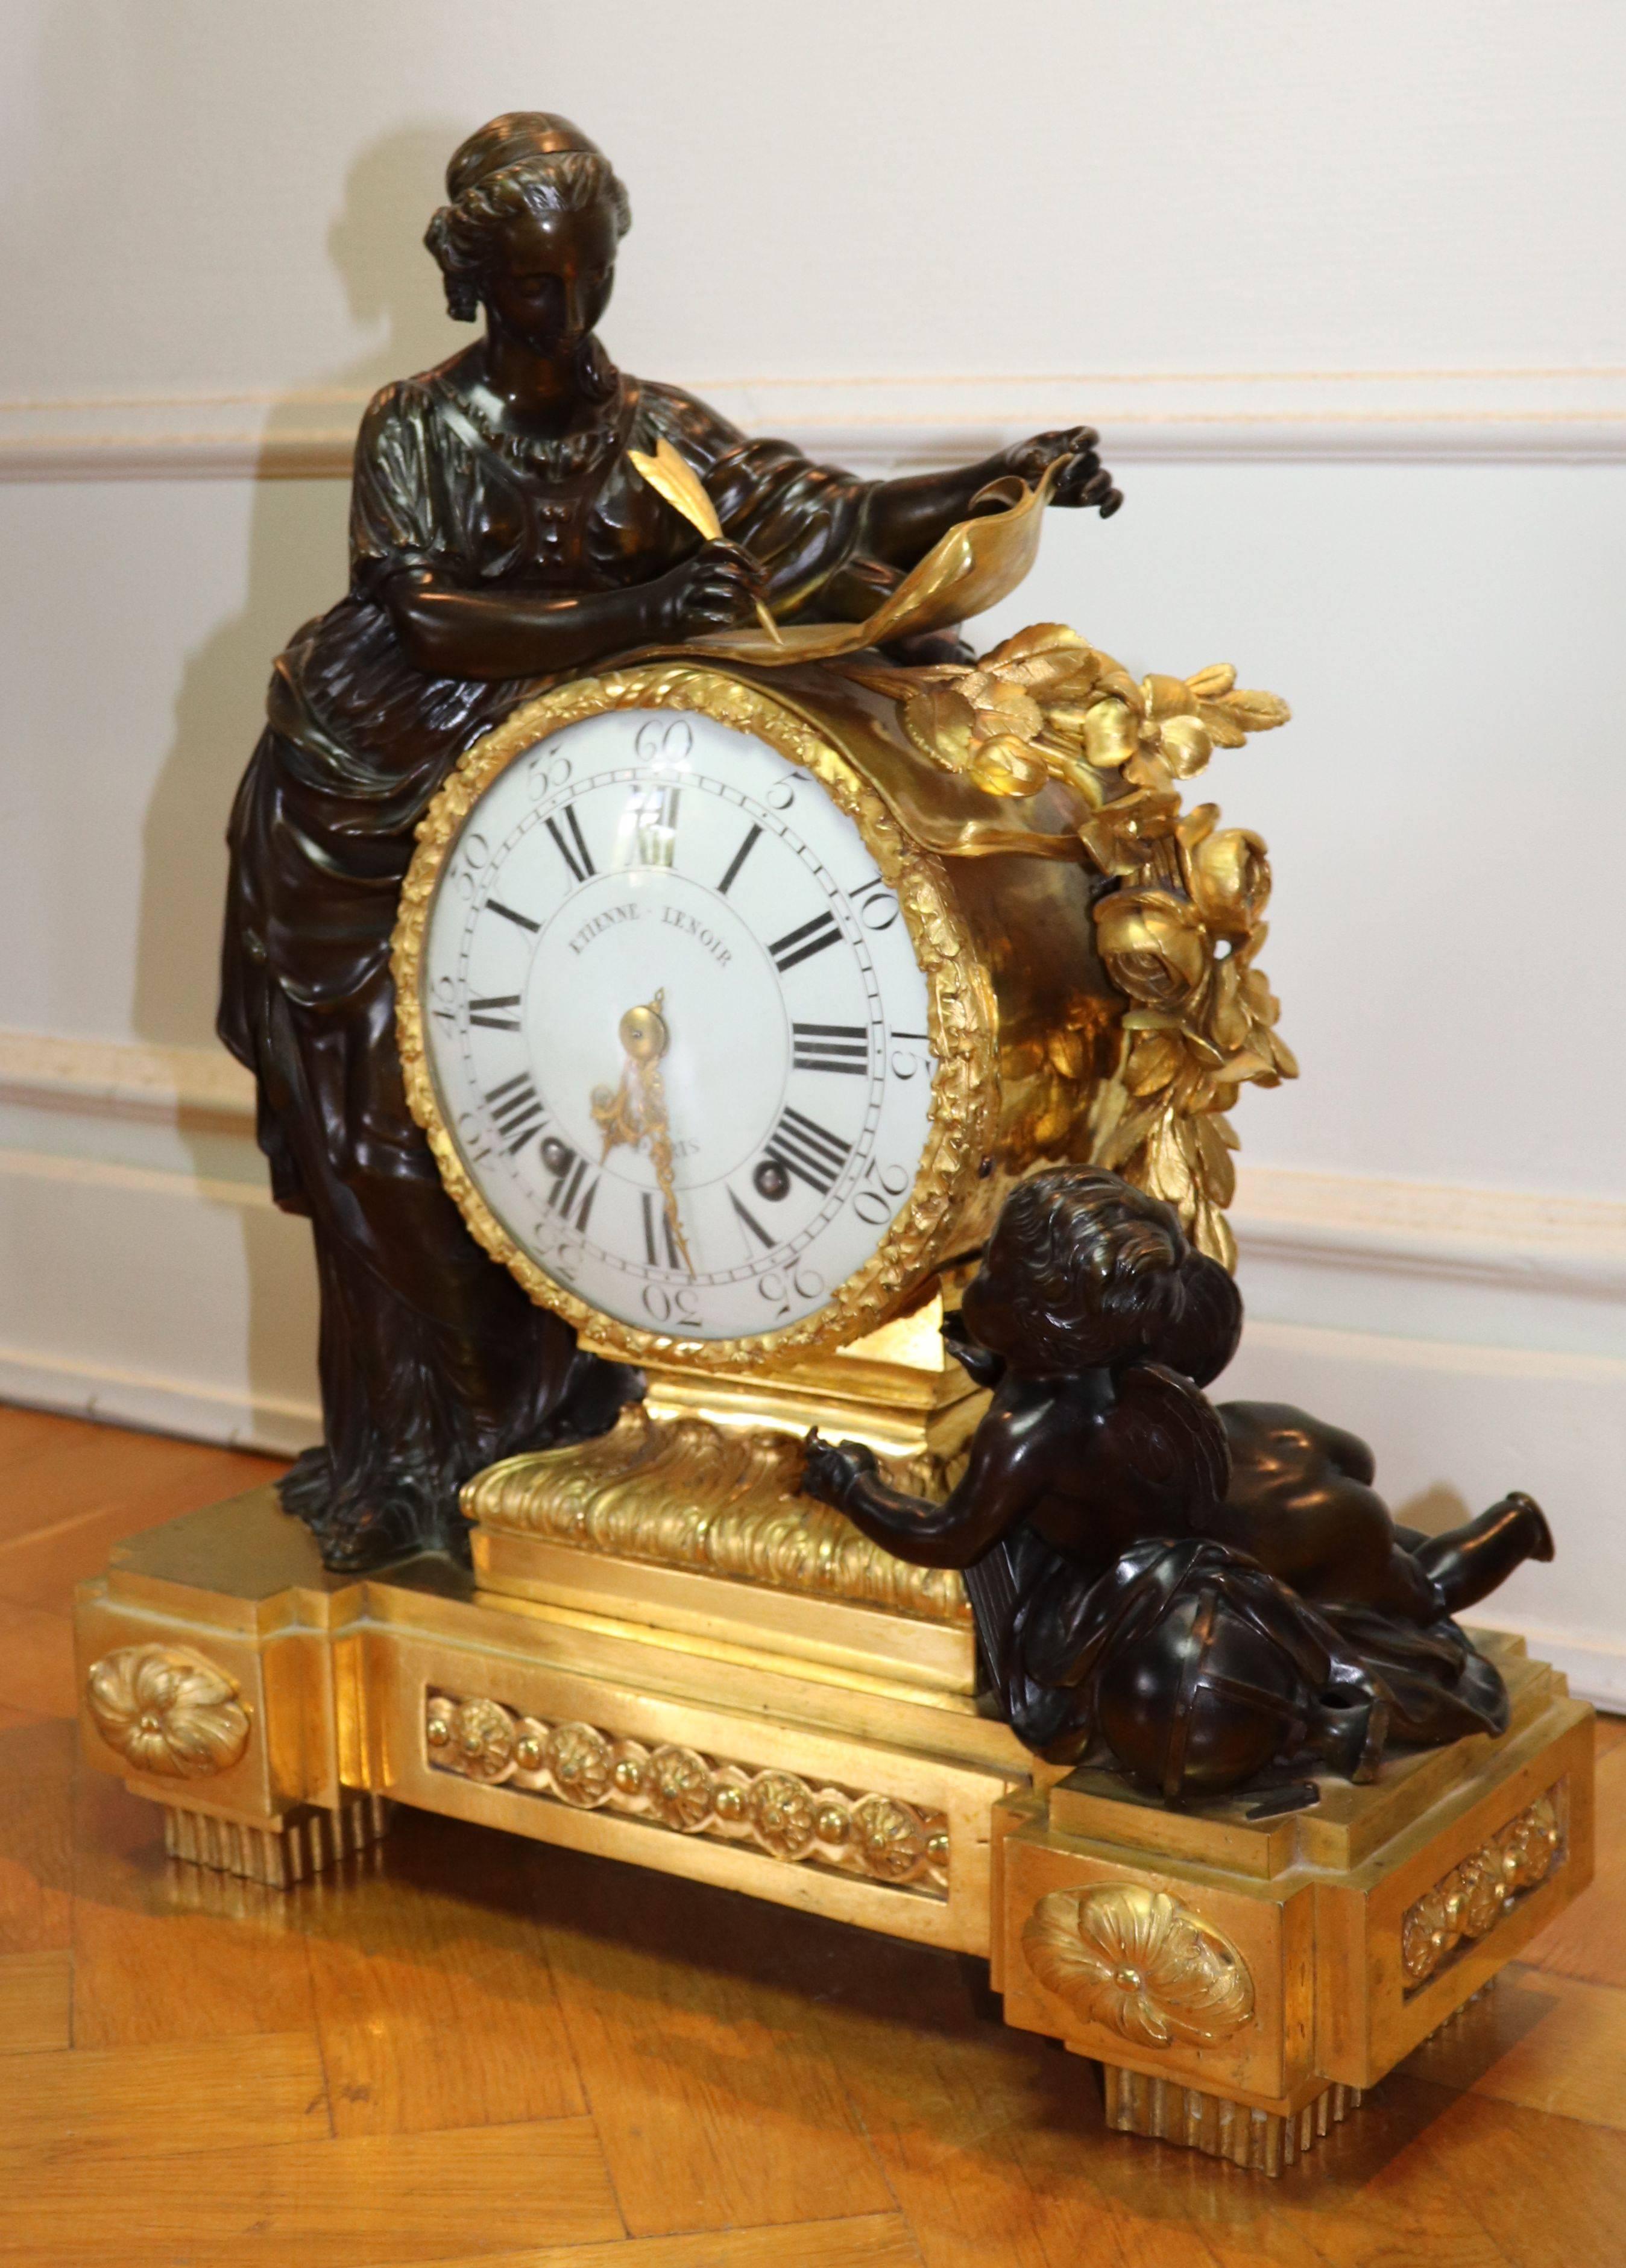 A Louis XVI gilt bronze and patinated mantel clock, case signed Morley movement signed by Etienne Lenoir dial also signed Etienne Lenoir,
see images.
An identical is located at royal collection in Stockholm/Sweden.